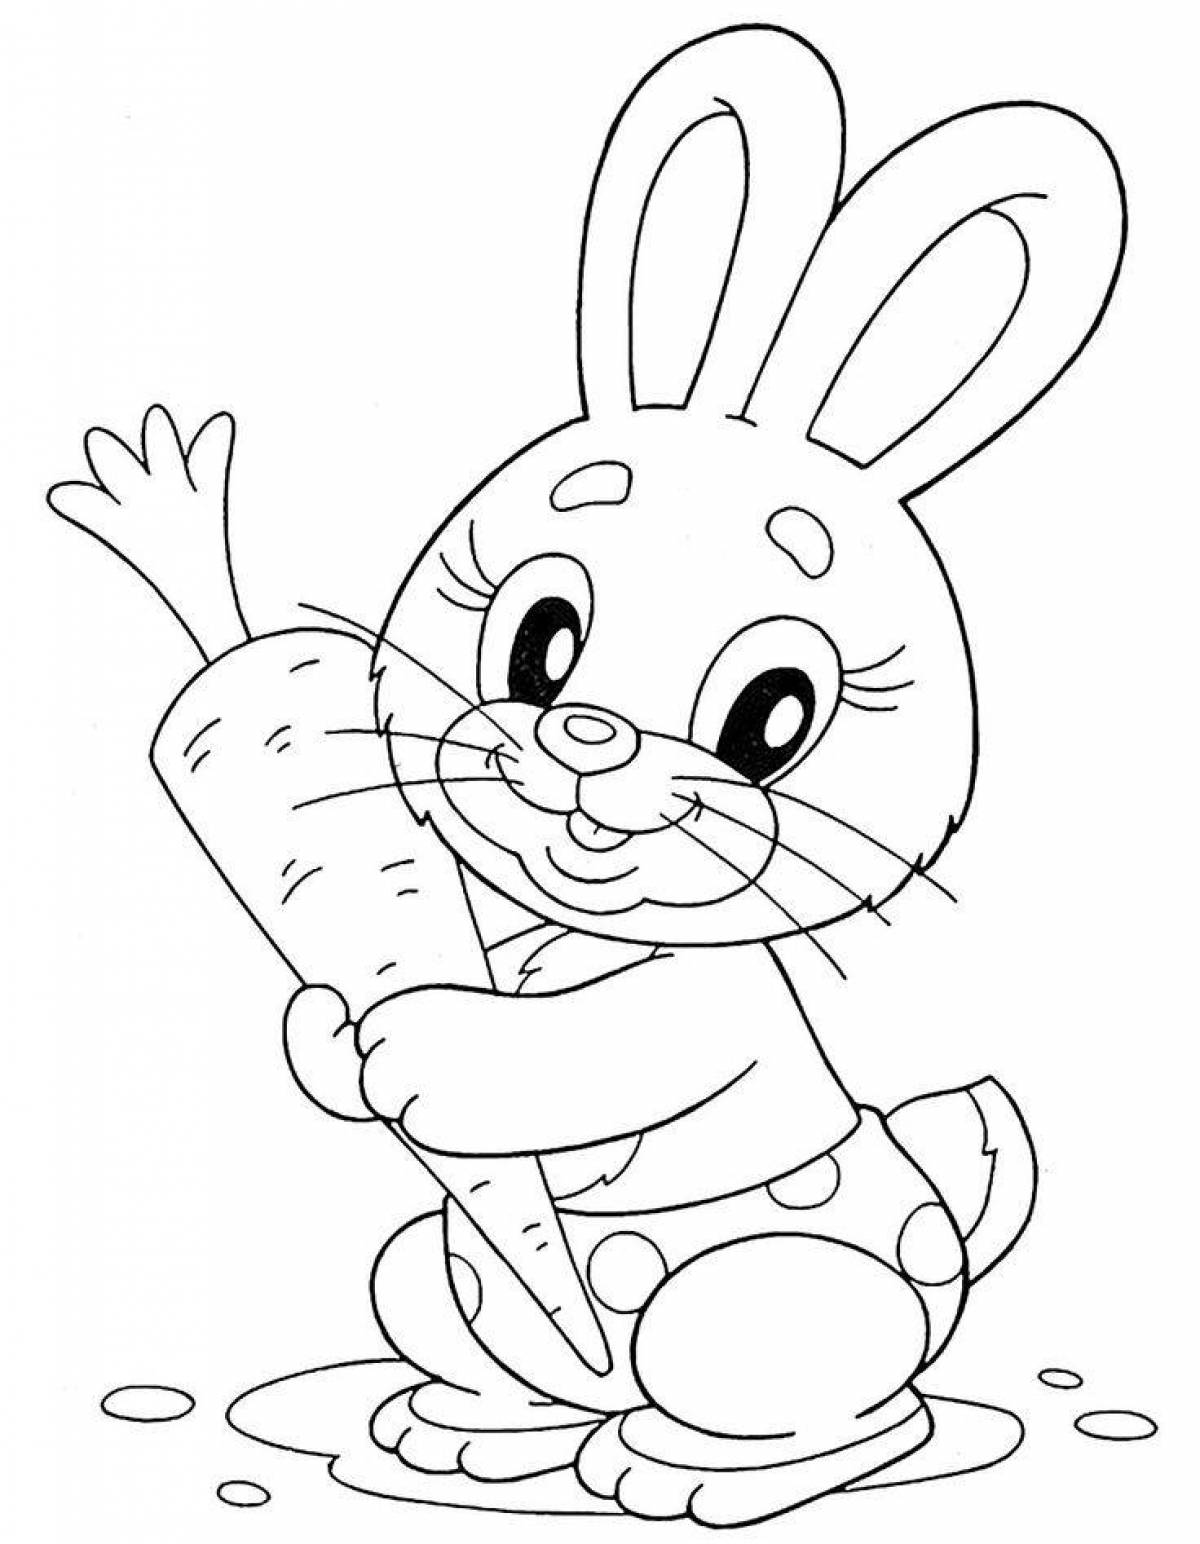 Exquisite coloring hare for kids